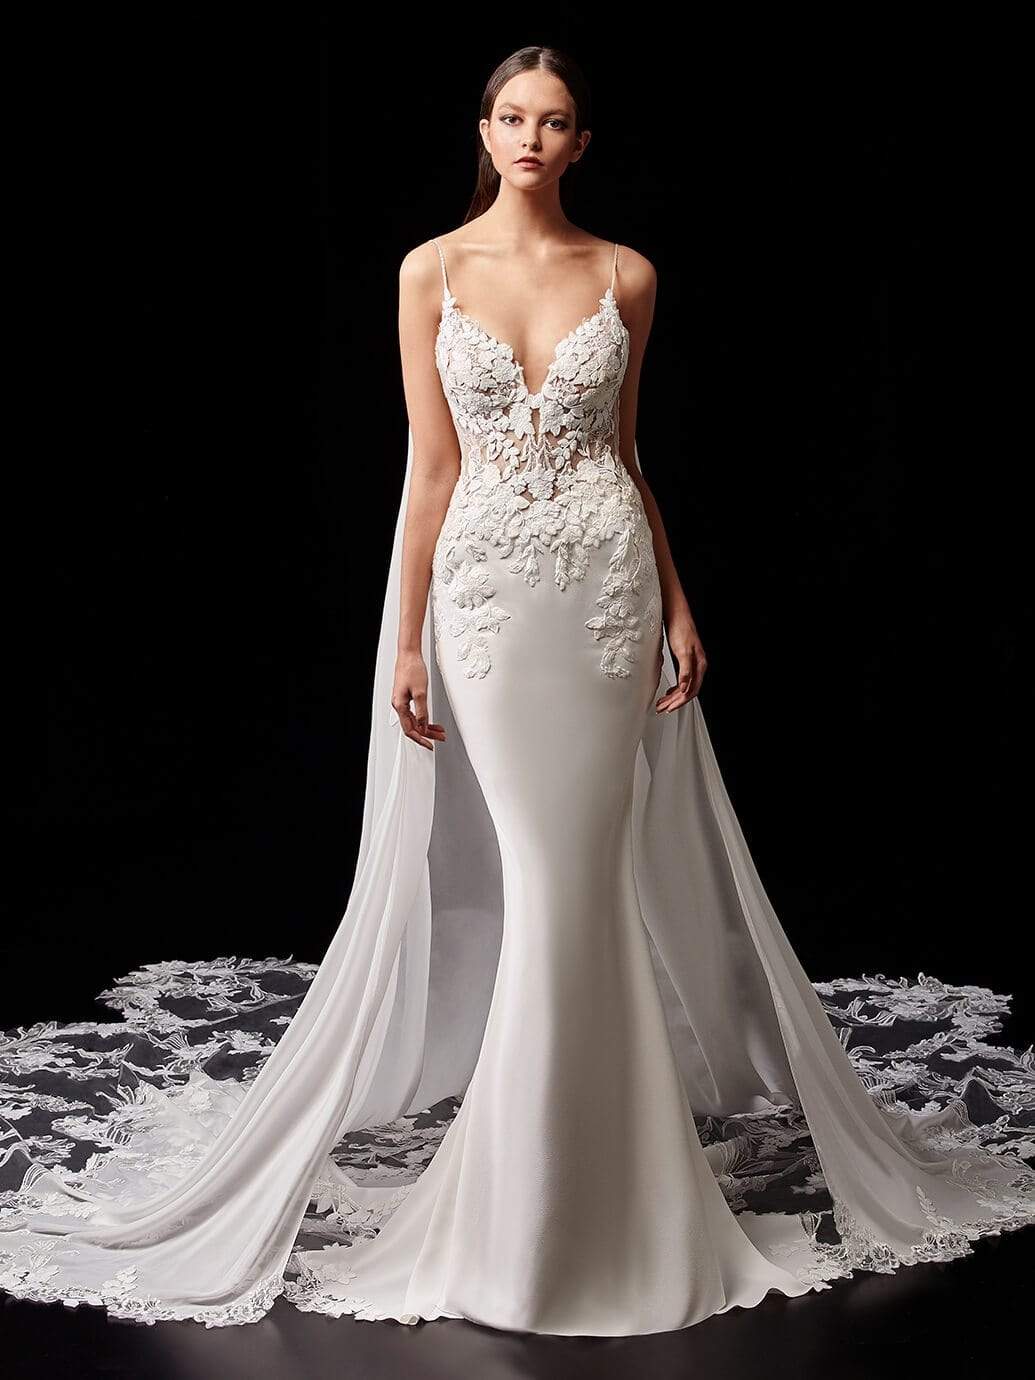 Category: Pearl Wedding Dresses